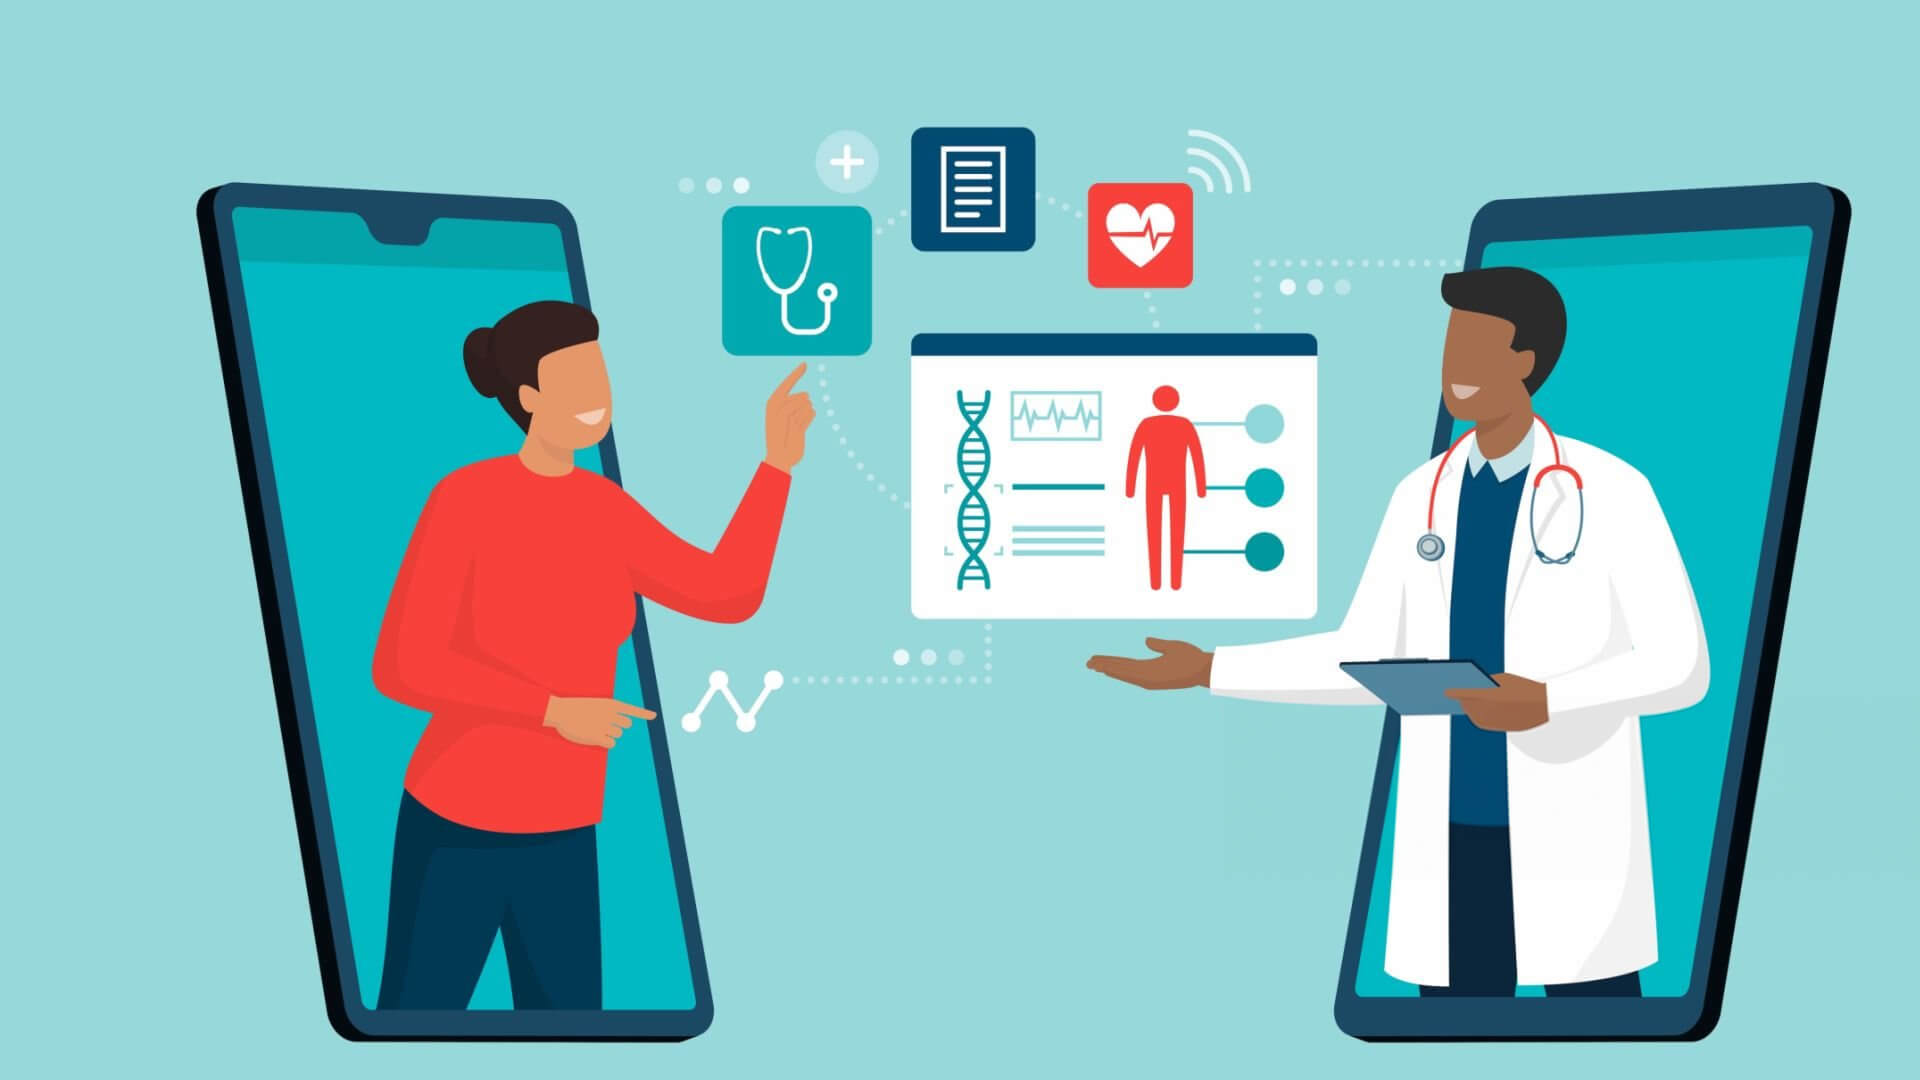 Two digital screens depict a woman pointing to medical icons and a male doctor with a clipboard, set against a teal background with medical data visuals.